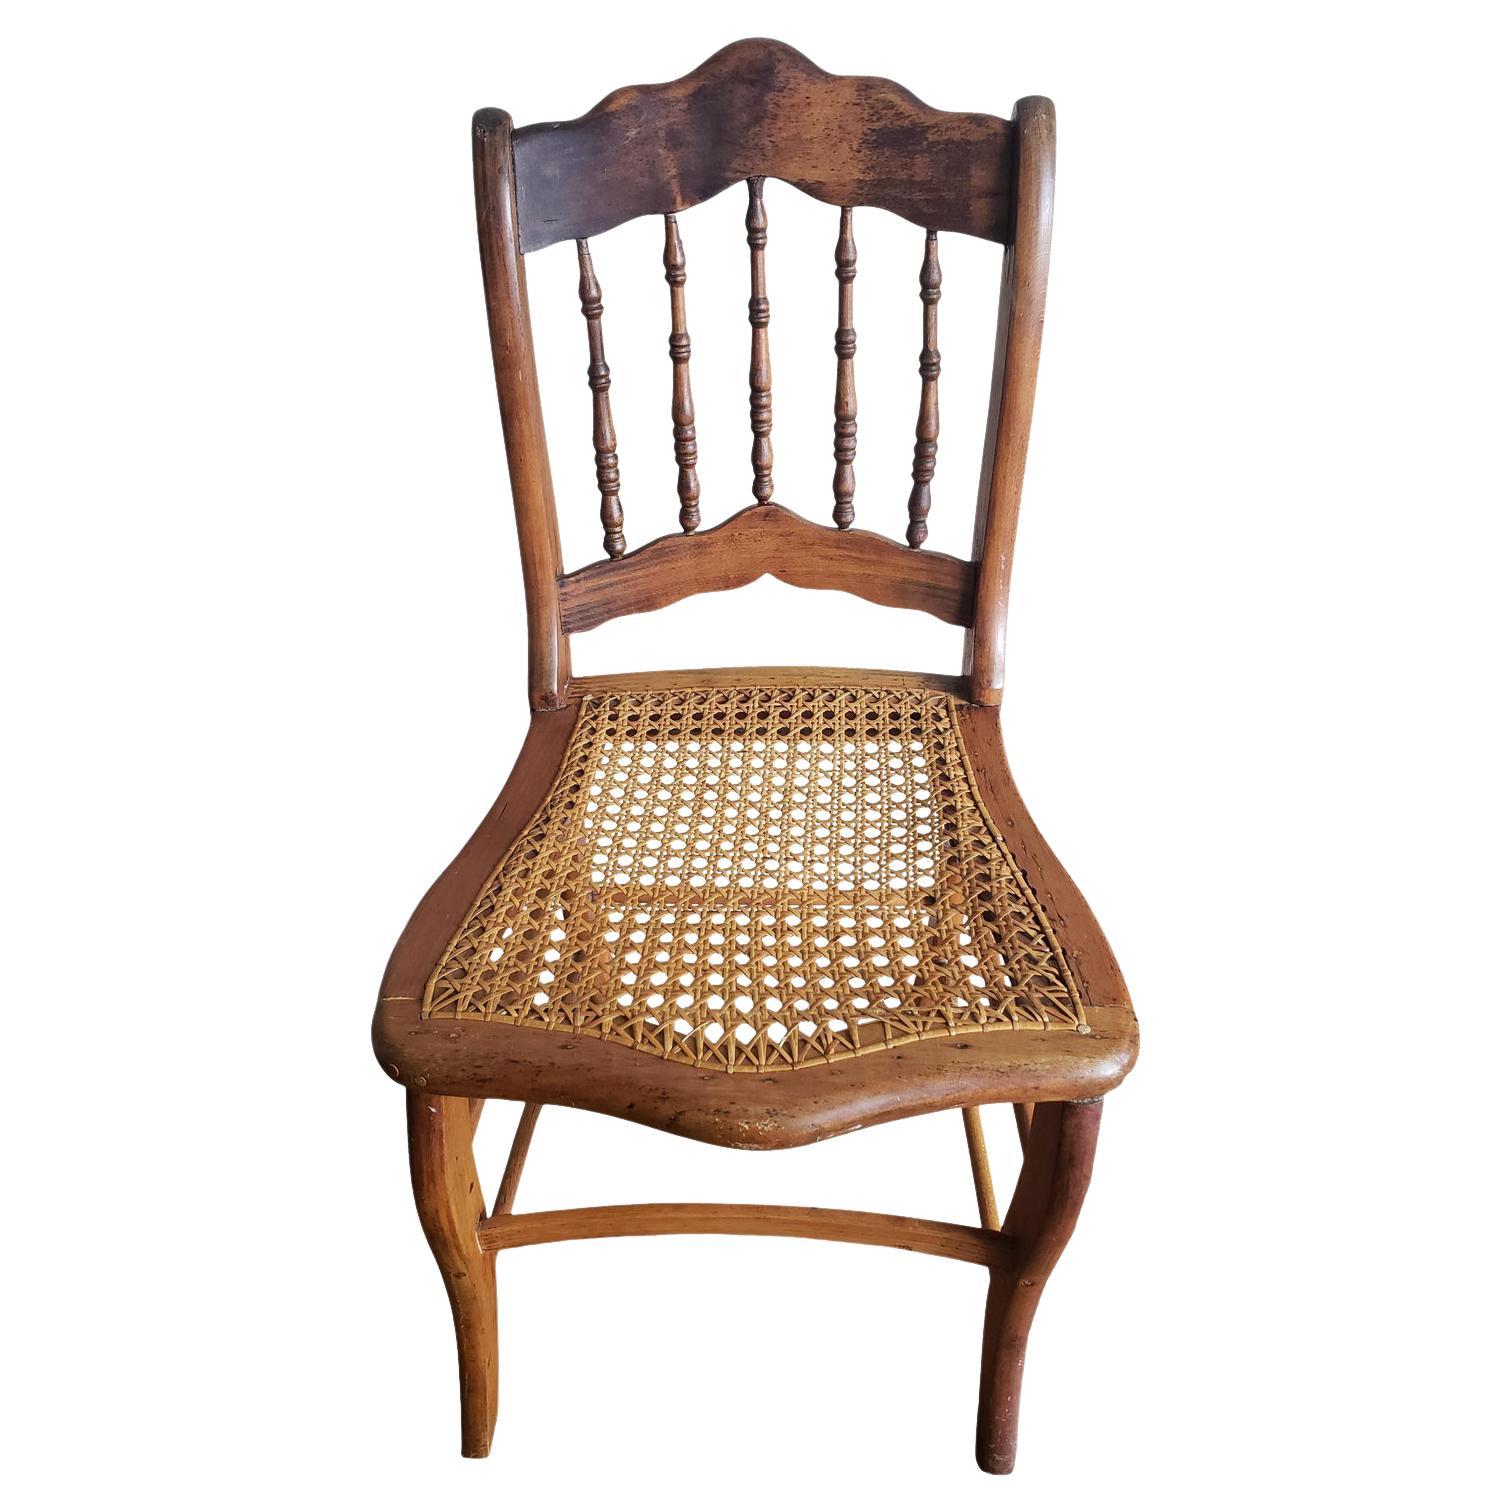 Mid 19th Century Maple Spindle Back Caned Seat Chair For Sale